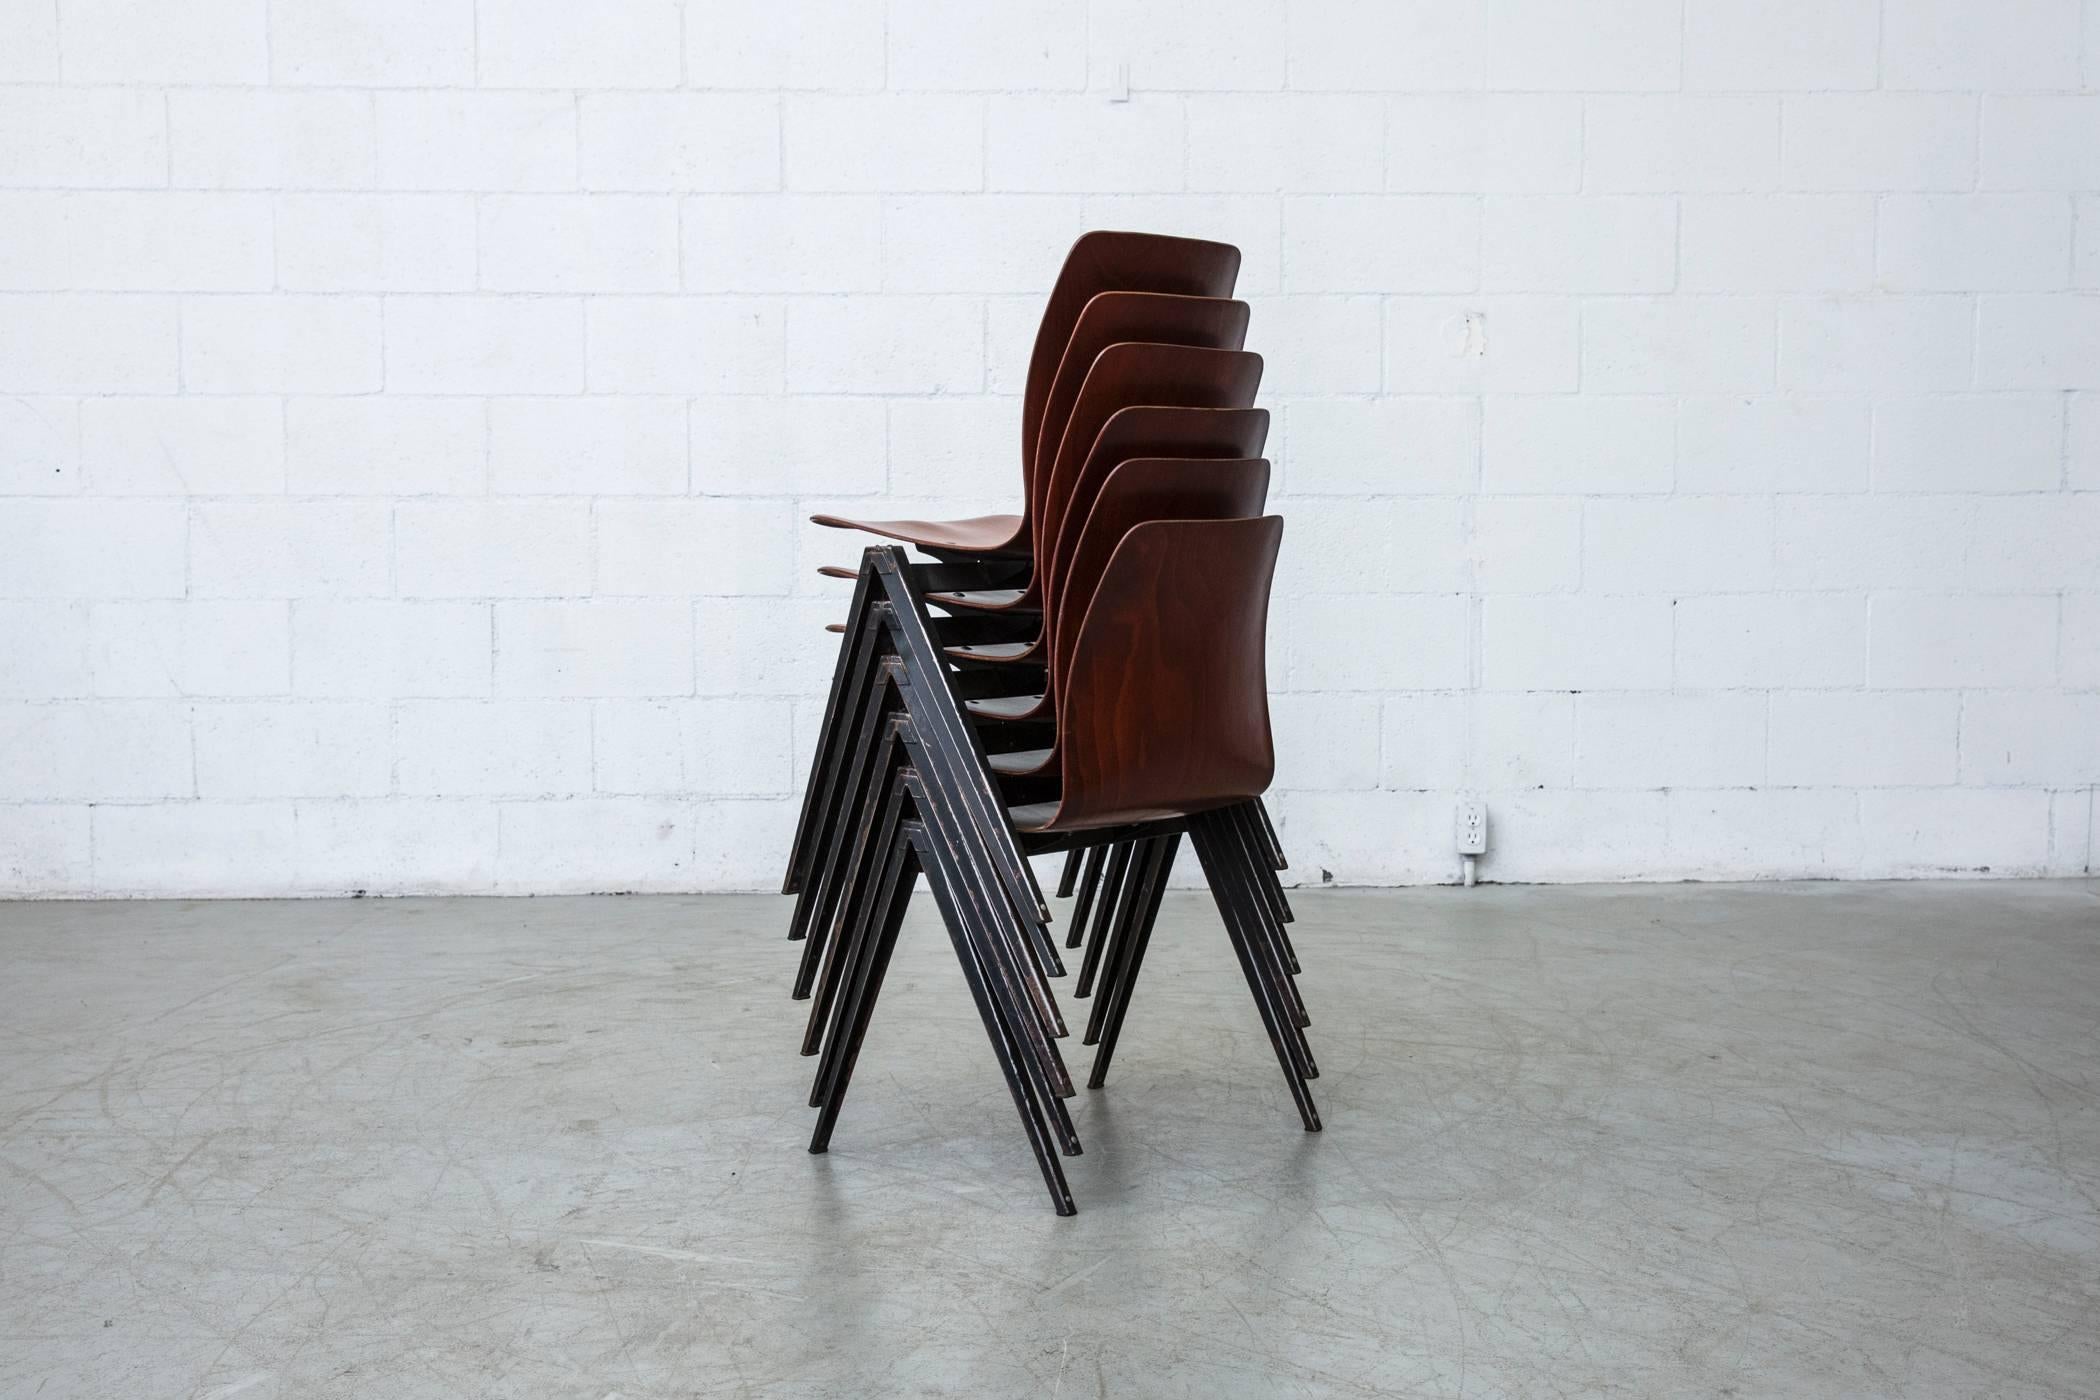 Dutch Set of Six Jean Prouve Inspired Industrial Stacking Chairs